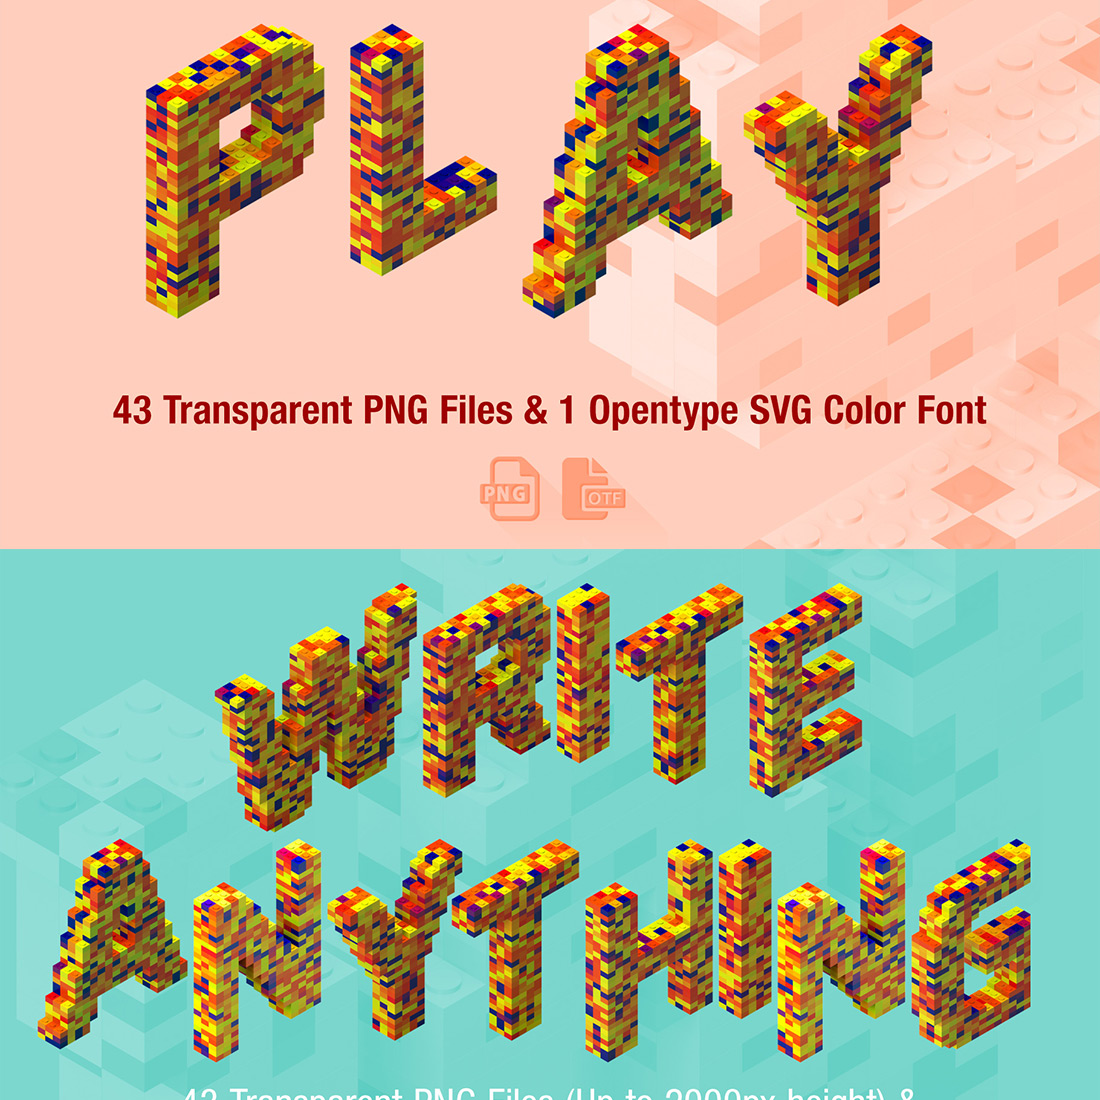 Opentype Color Font Ms Lego cover image.